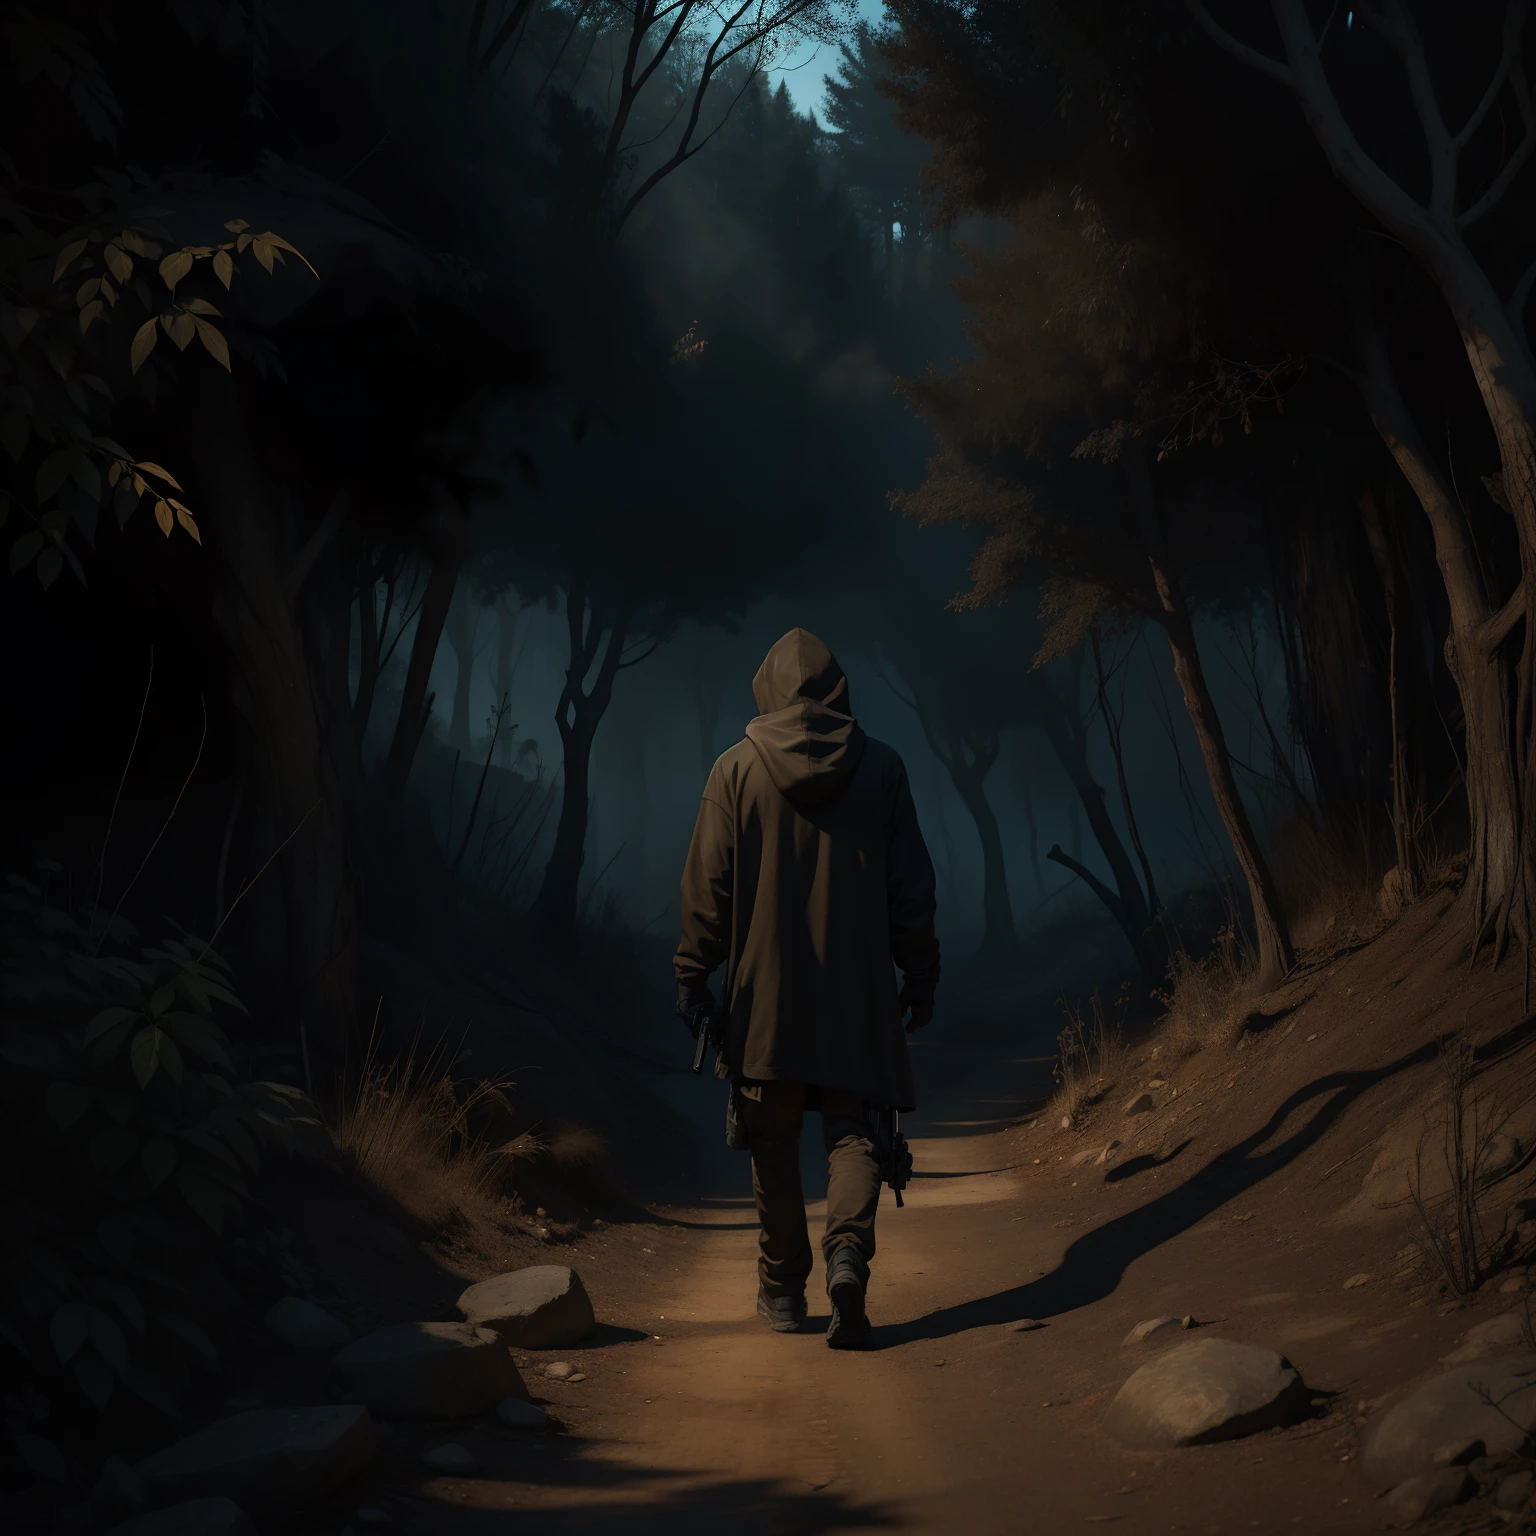 There's a man walking down a dark path in the dry forest wearing a hoodie with a gun in his hand Dark fantasy